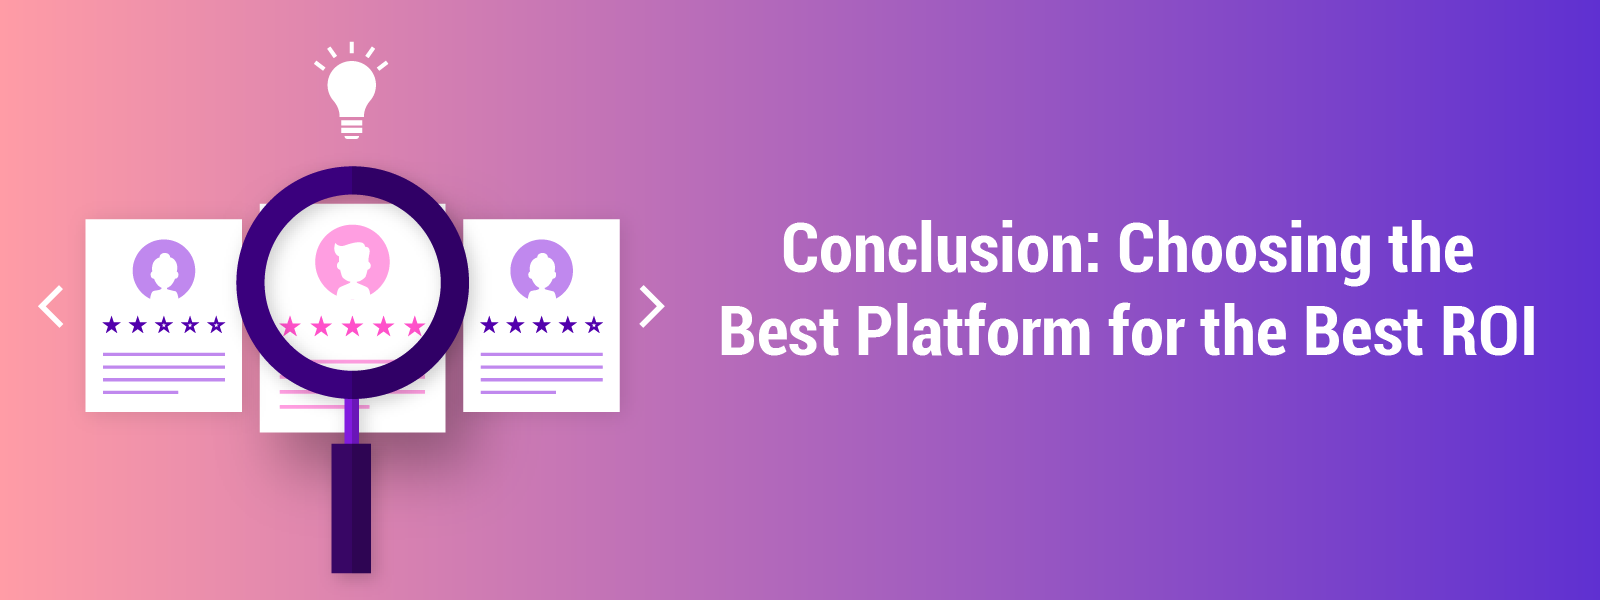 Conclusion: Choosing the Best Platform for the Best ROI